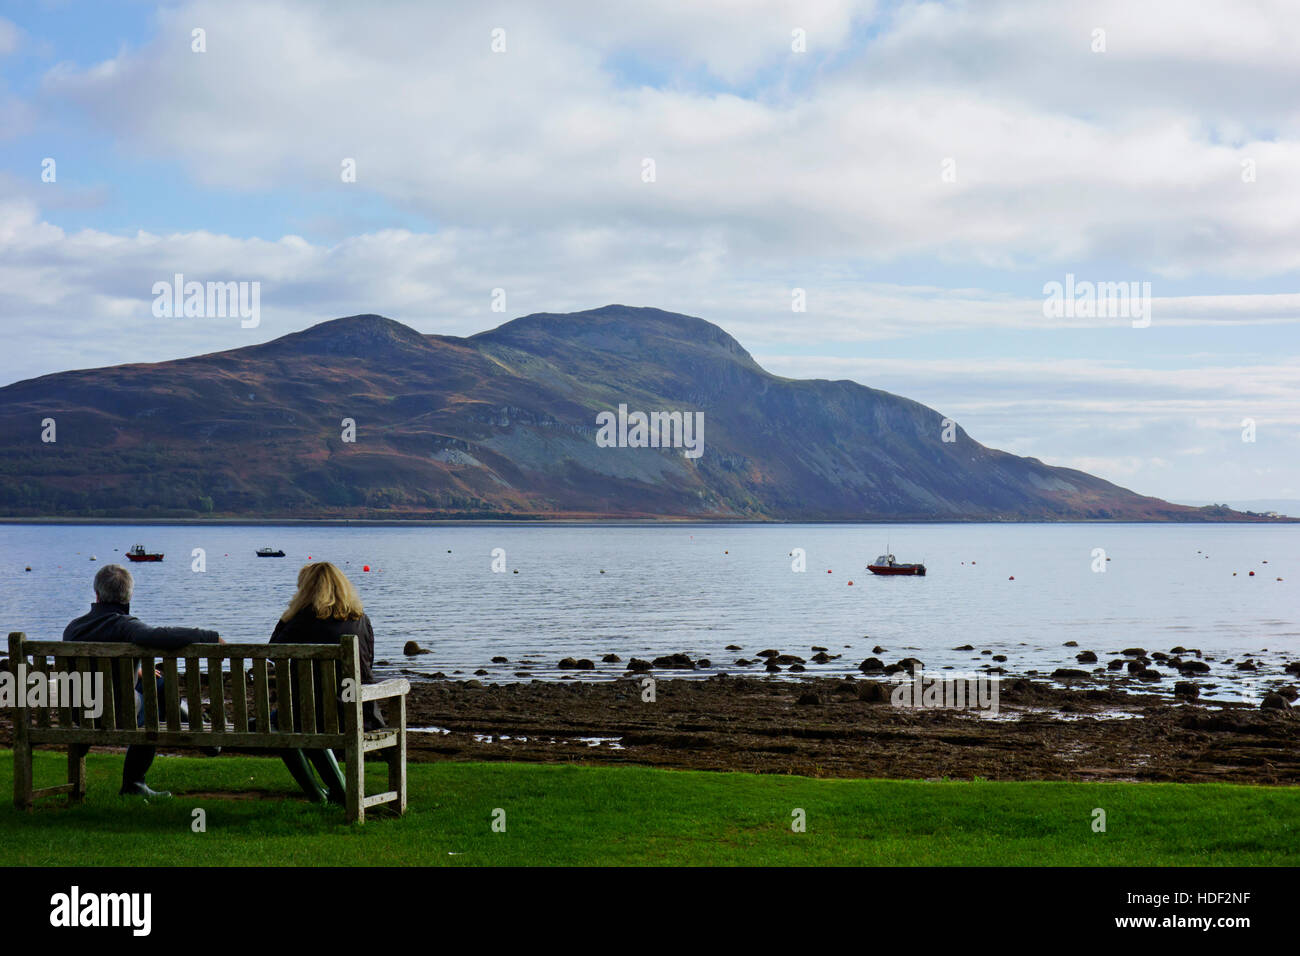 View of Holy Isle from Lamlash, Isle of Arran, in the Firth of Clyde, Scotland. Stock Photo